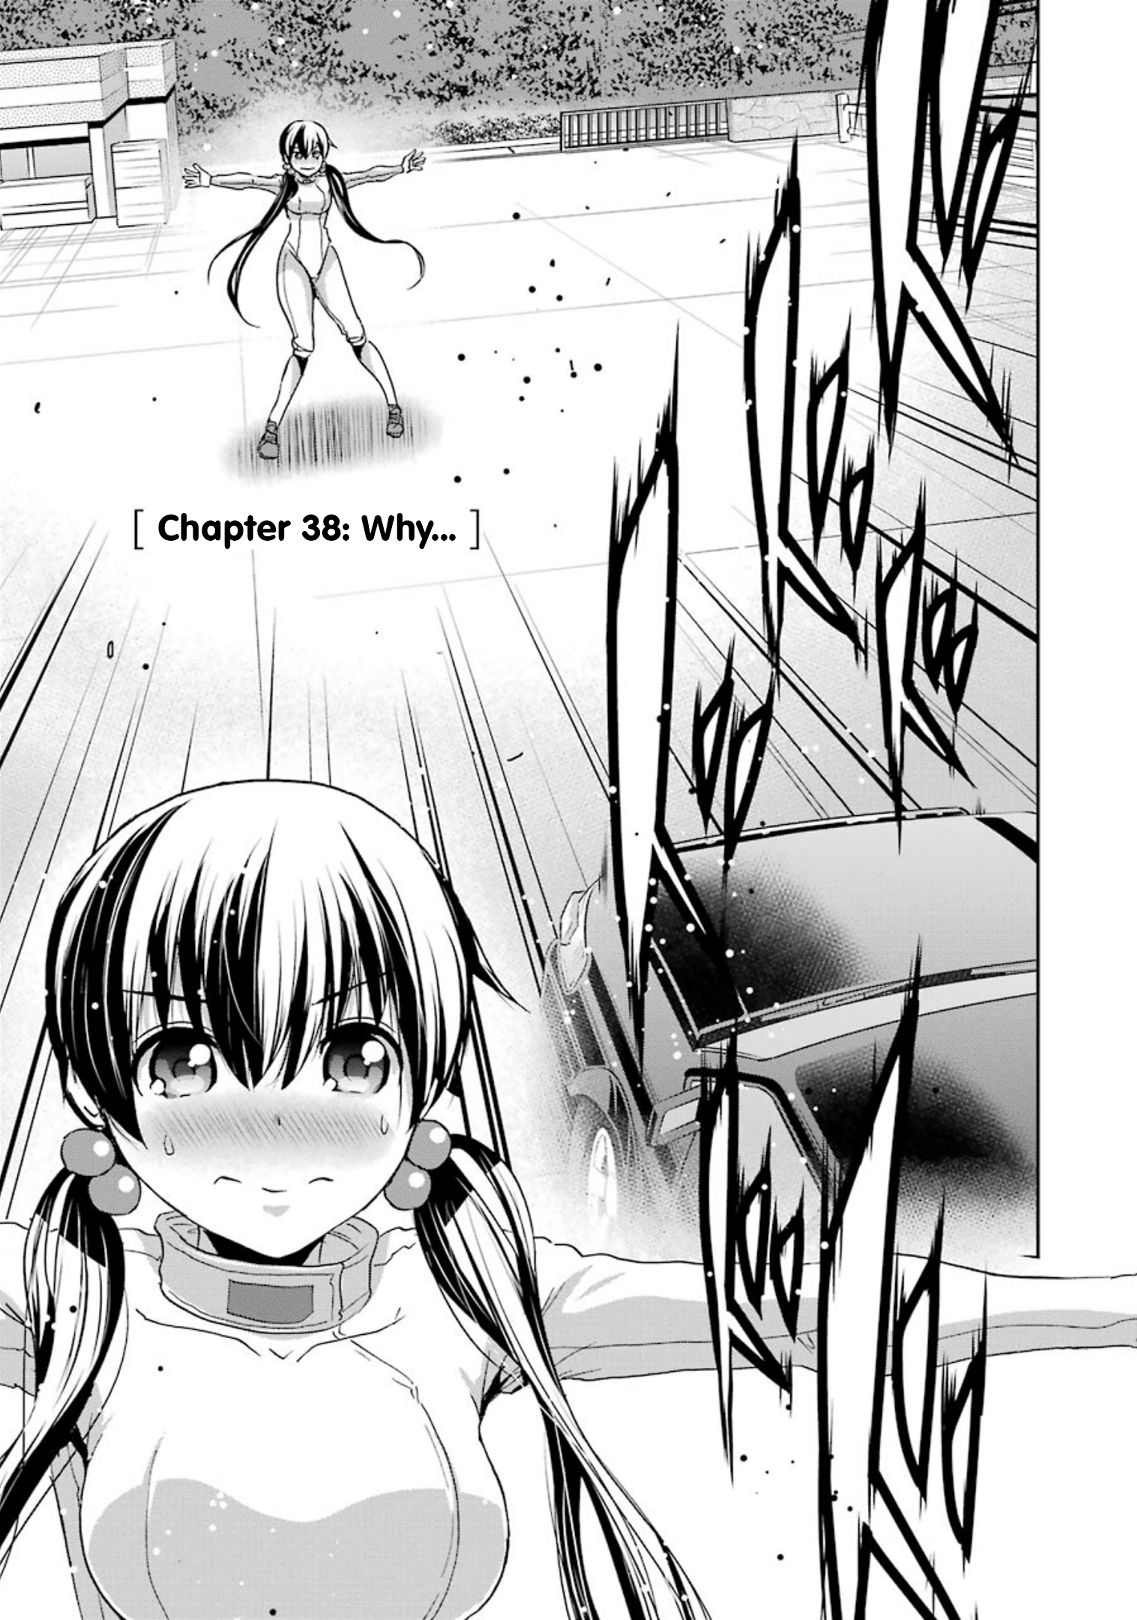 Duel! Vol. 5 Ch. 38 Why...